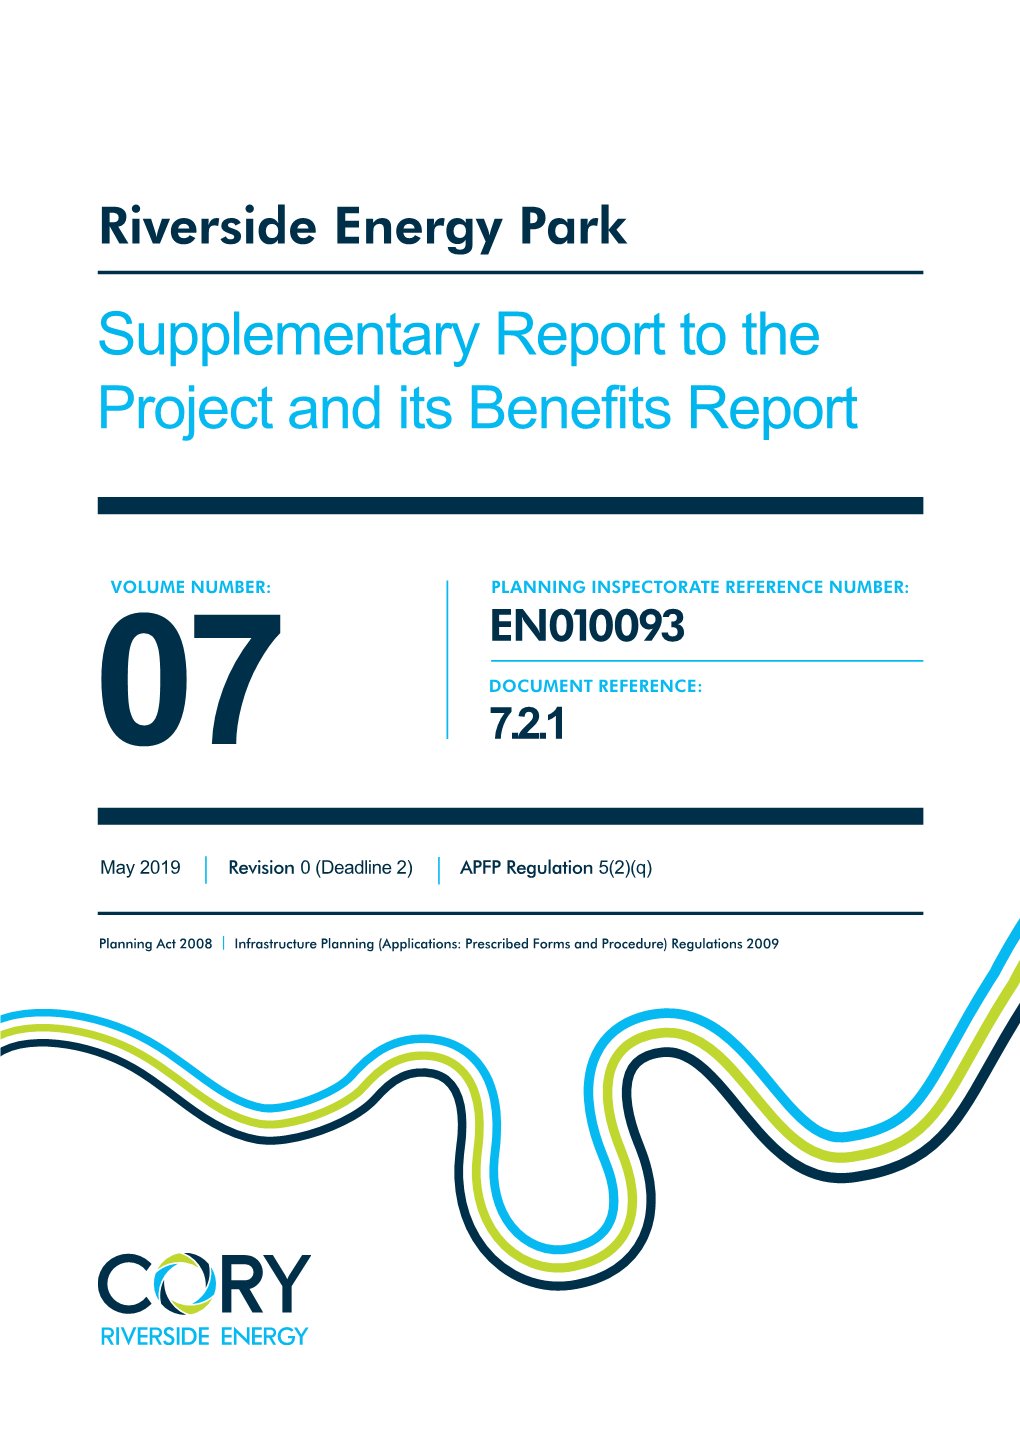 Supplementary Report to the Project and Its Benefits Report